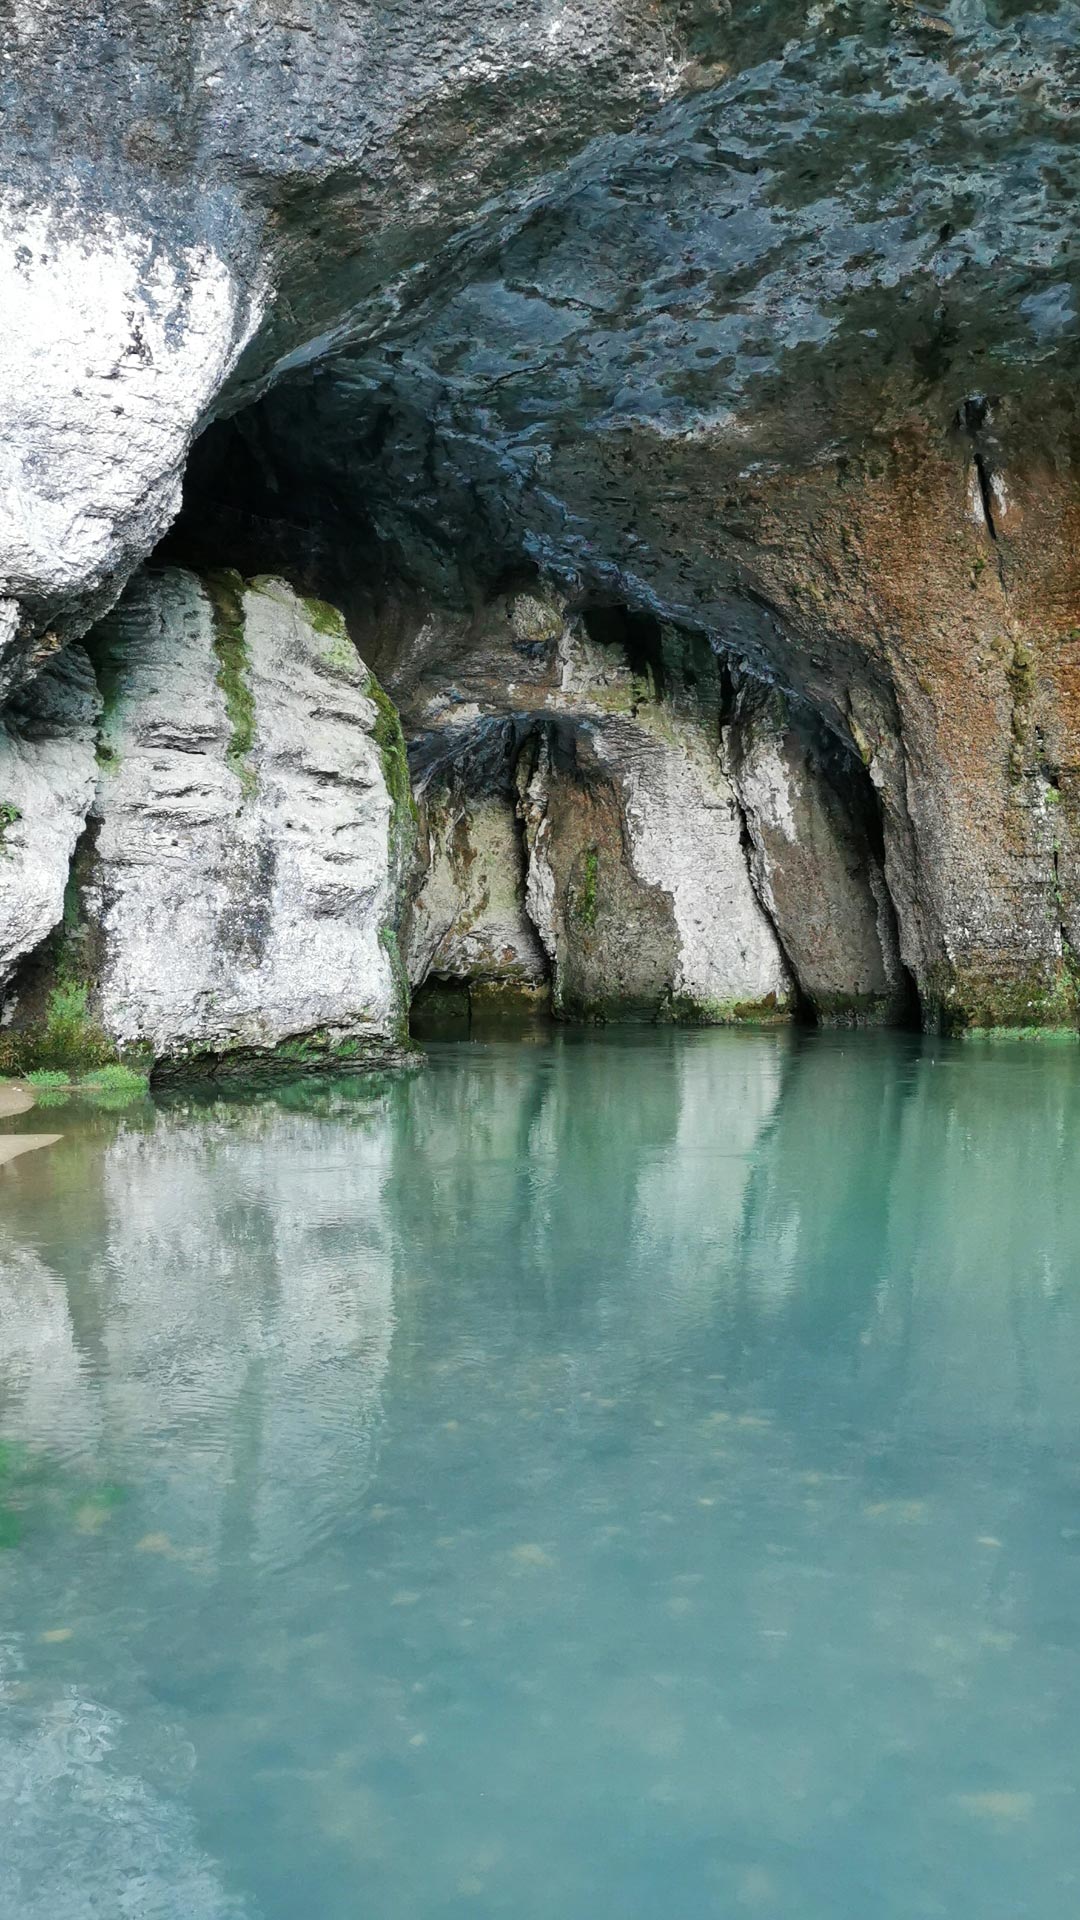 Water source in a cave